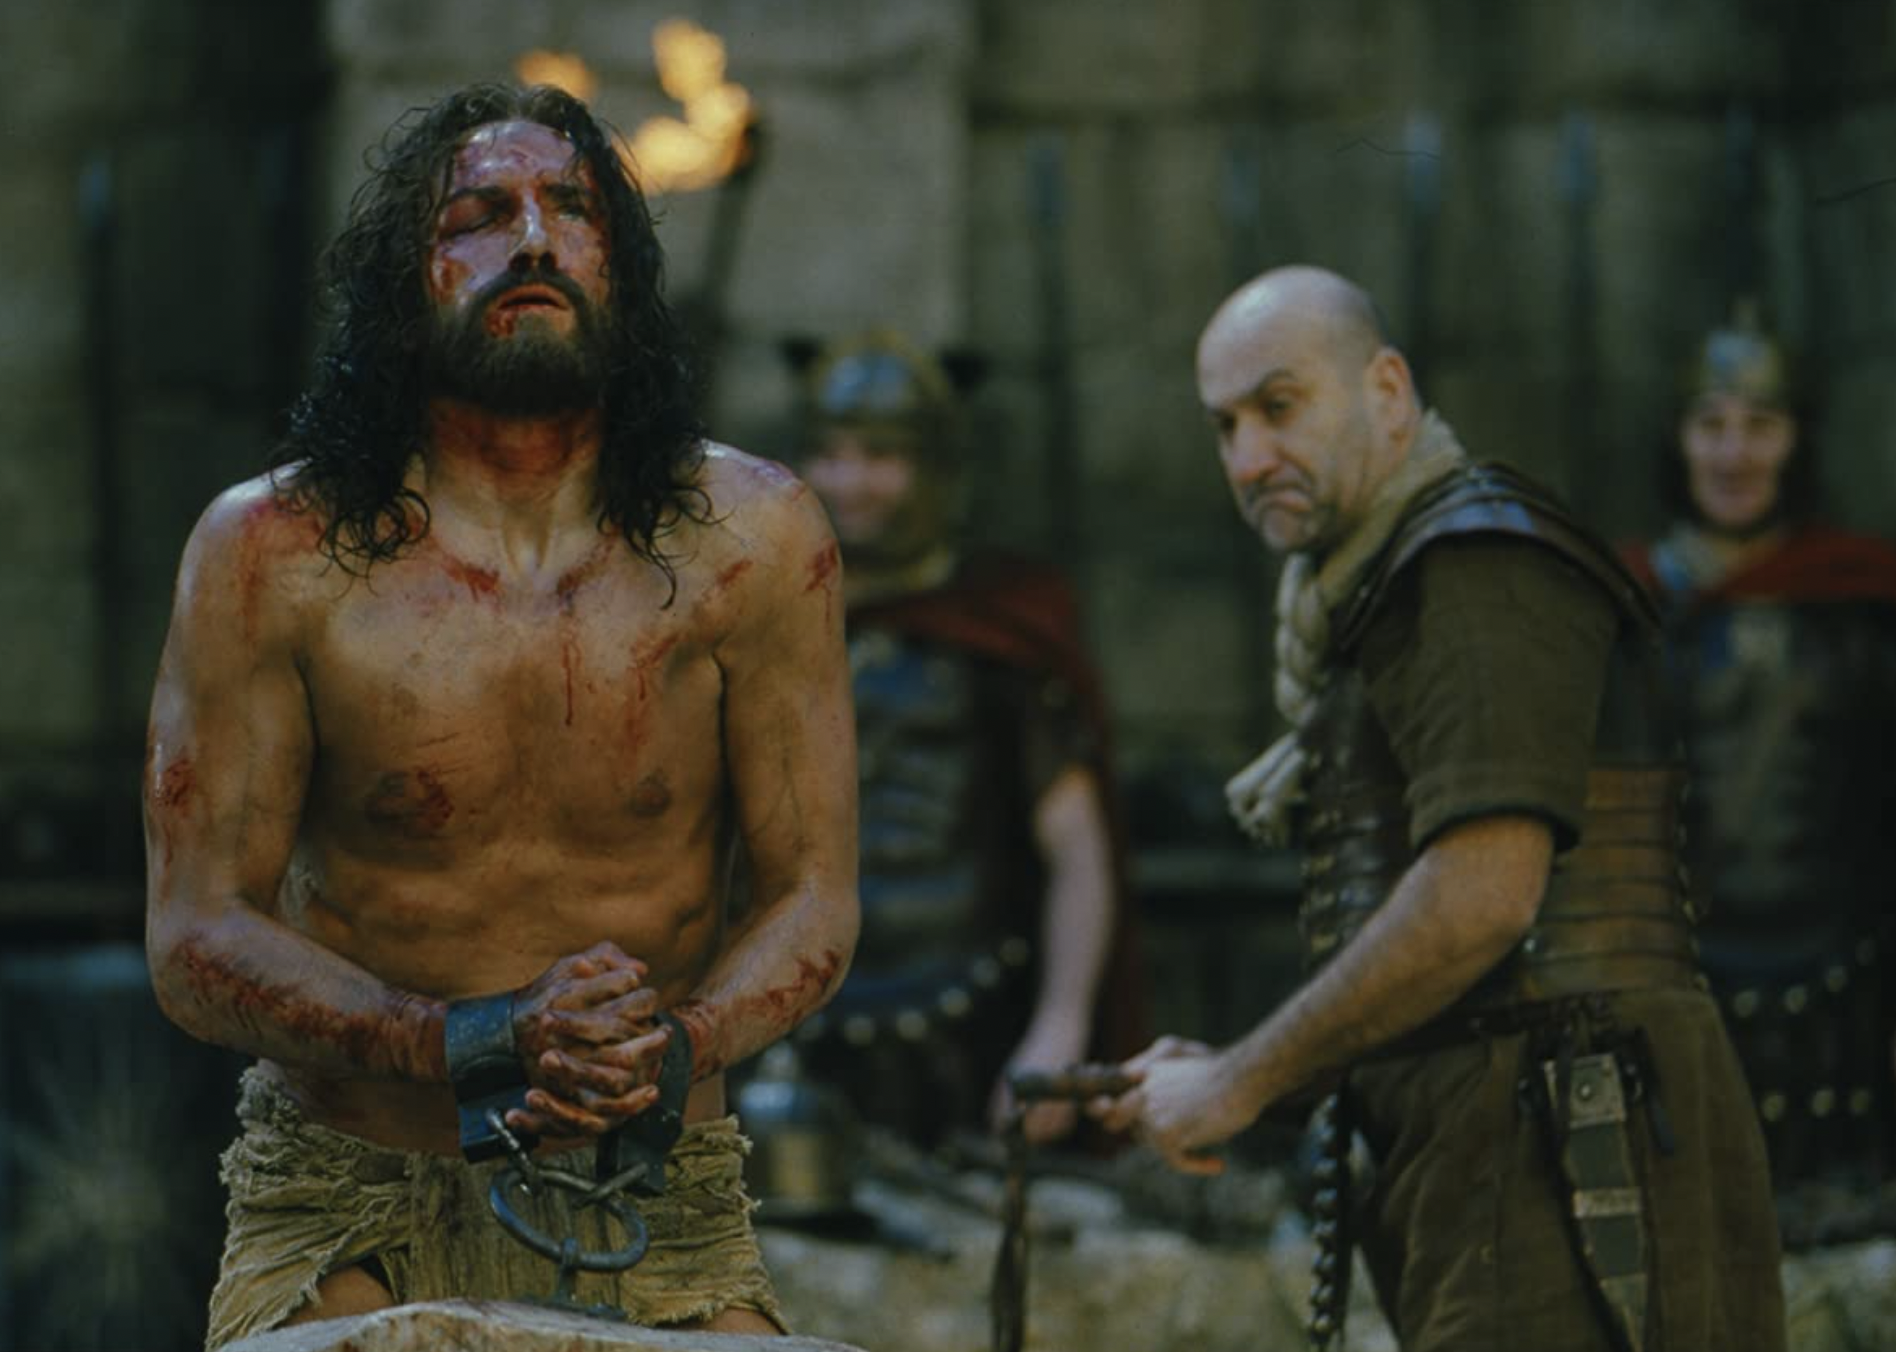 Jim Caviezel and Dario D'Ambrosi in "The Passion of the Christ".